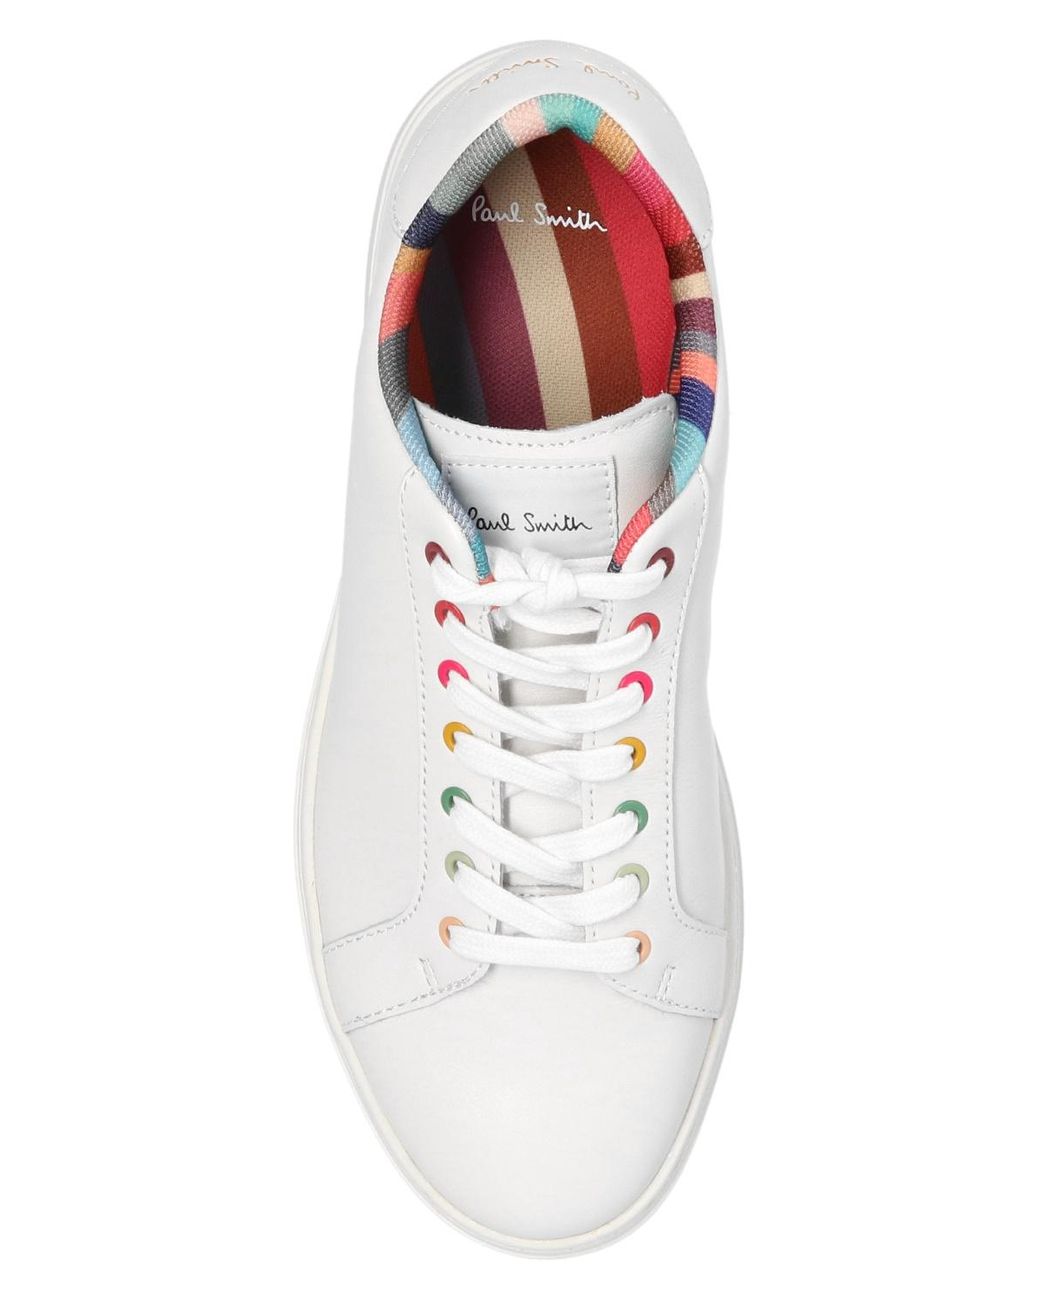 Paul Smith 'lapin' Sneakers in White | Lyst